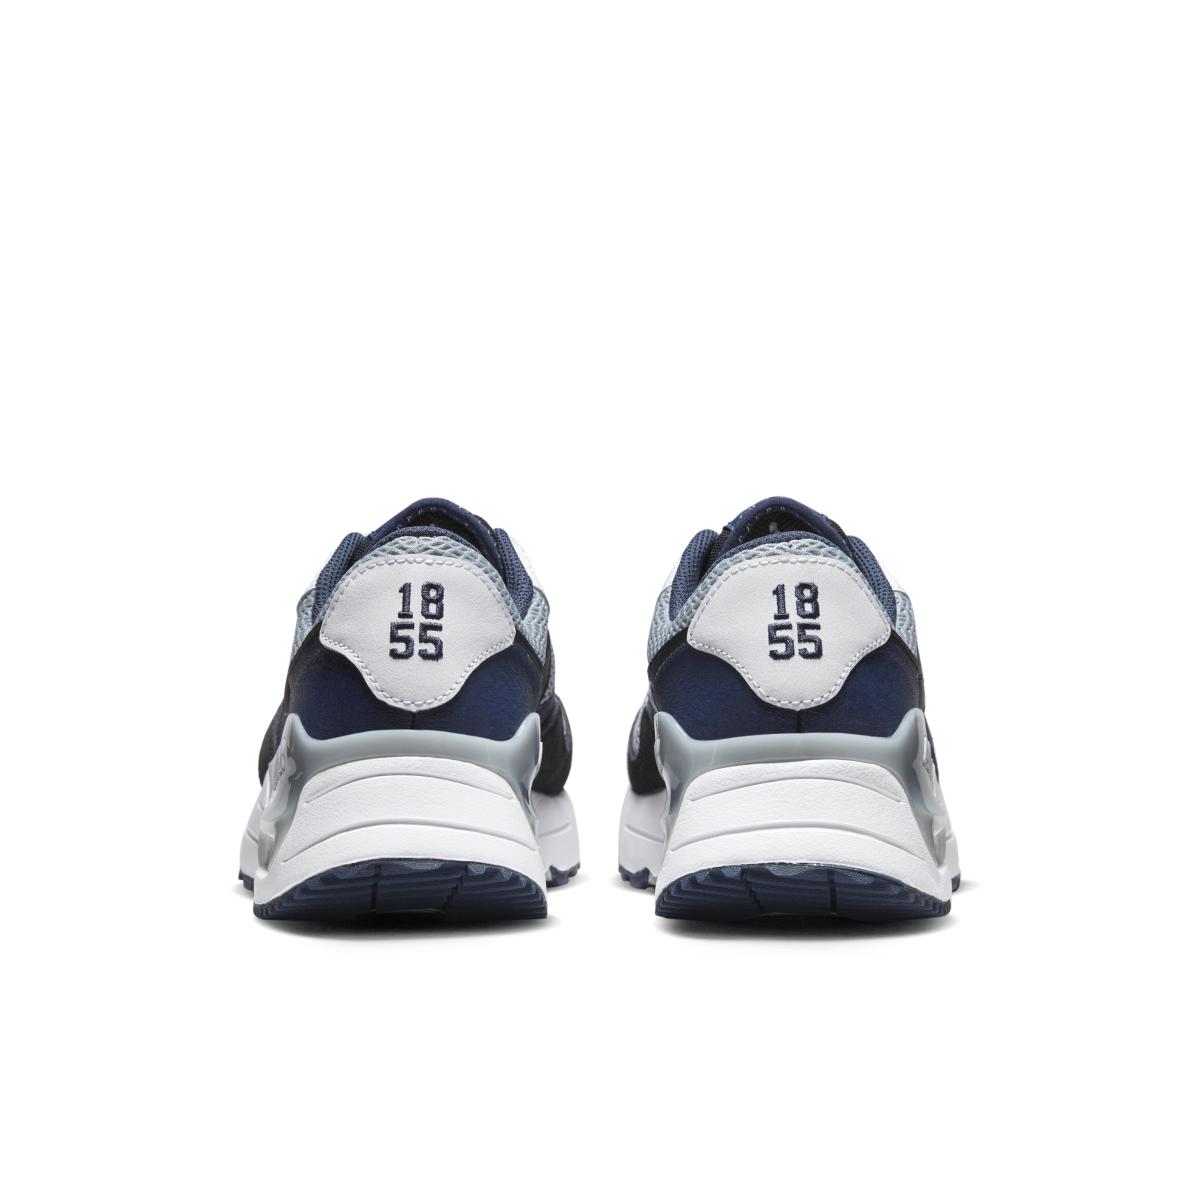 Penn State Nittany Lions Air Max SYSTM - $109.99